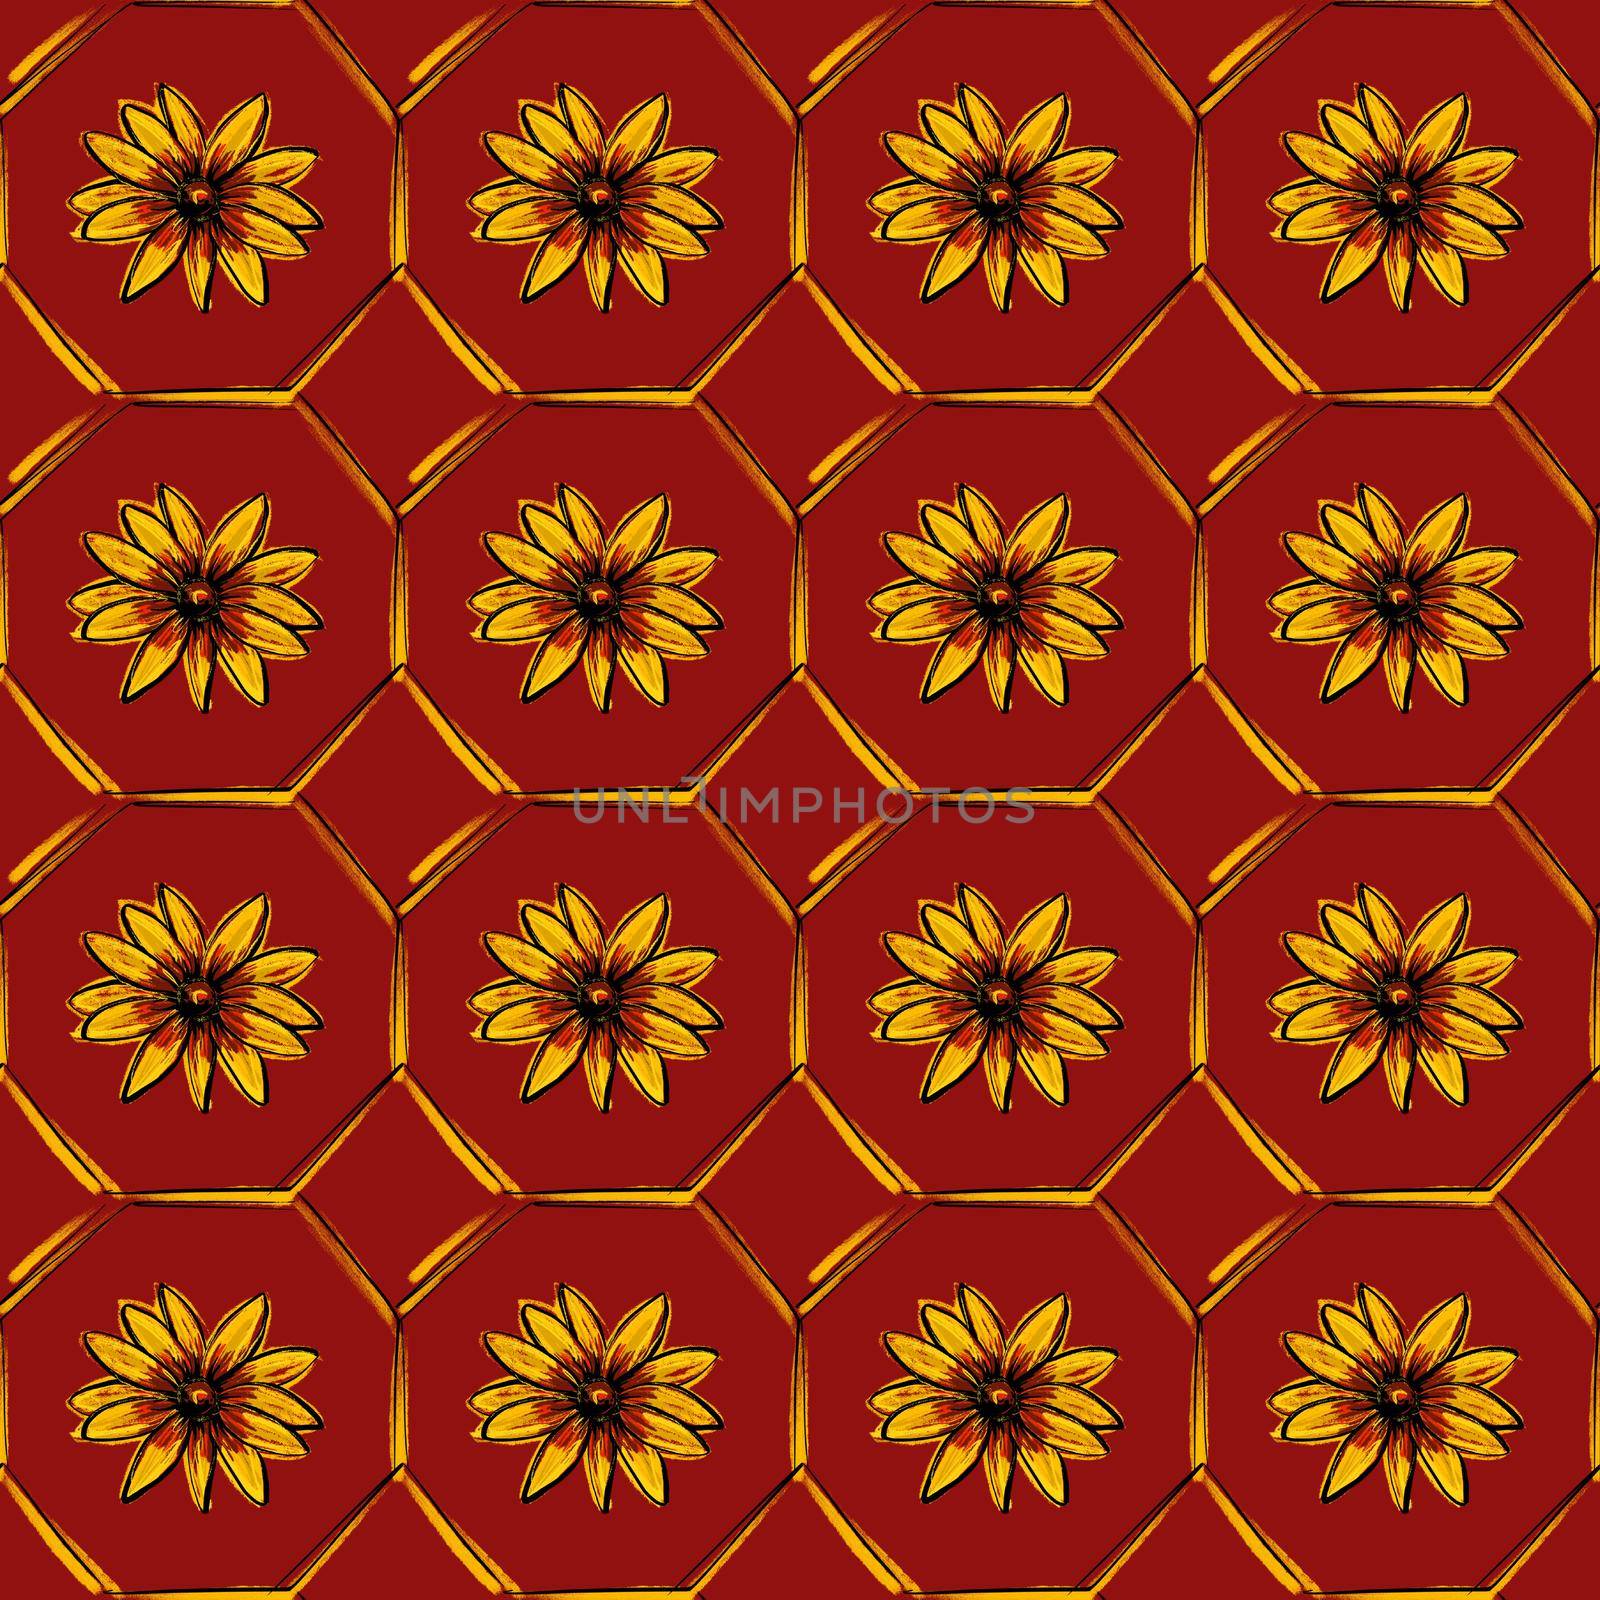 Seamless pattern. Beautiful yellow large rudbeckia or daisy flowers on a red background. Sunflowers, honeycomb wallpaper.